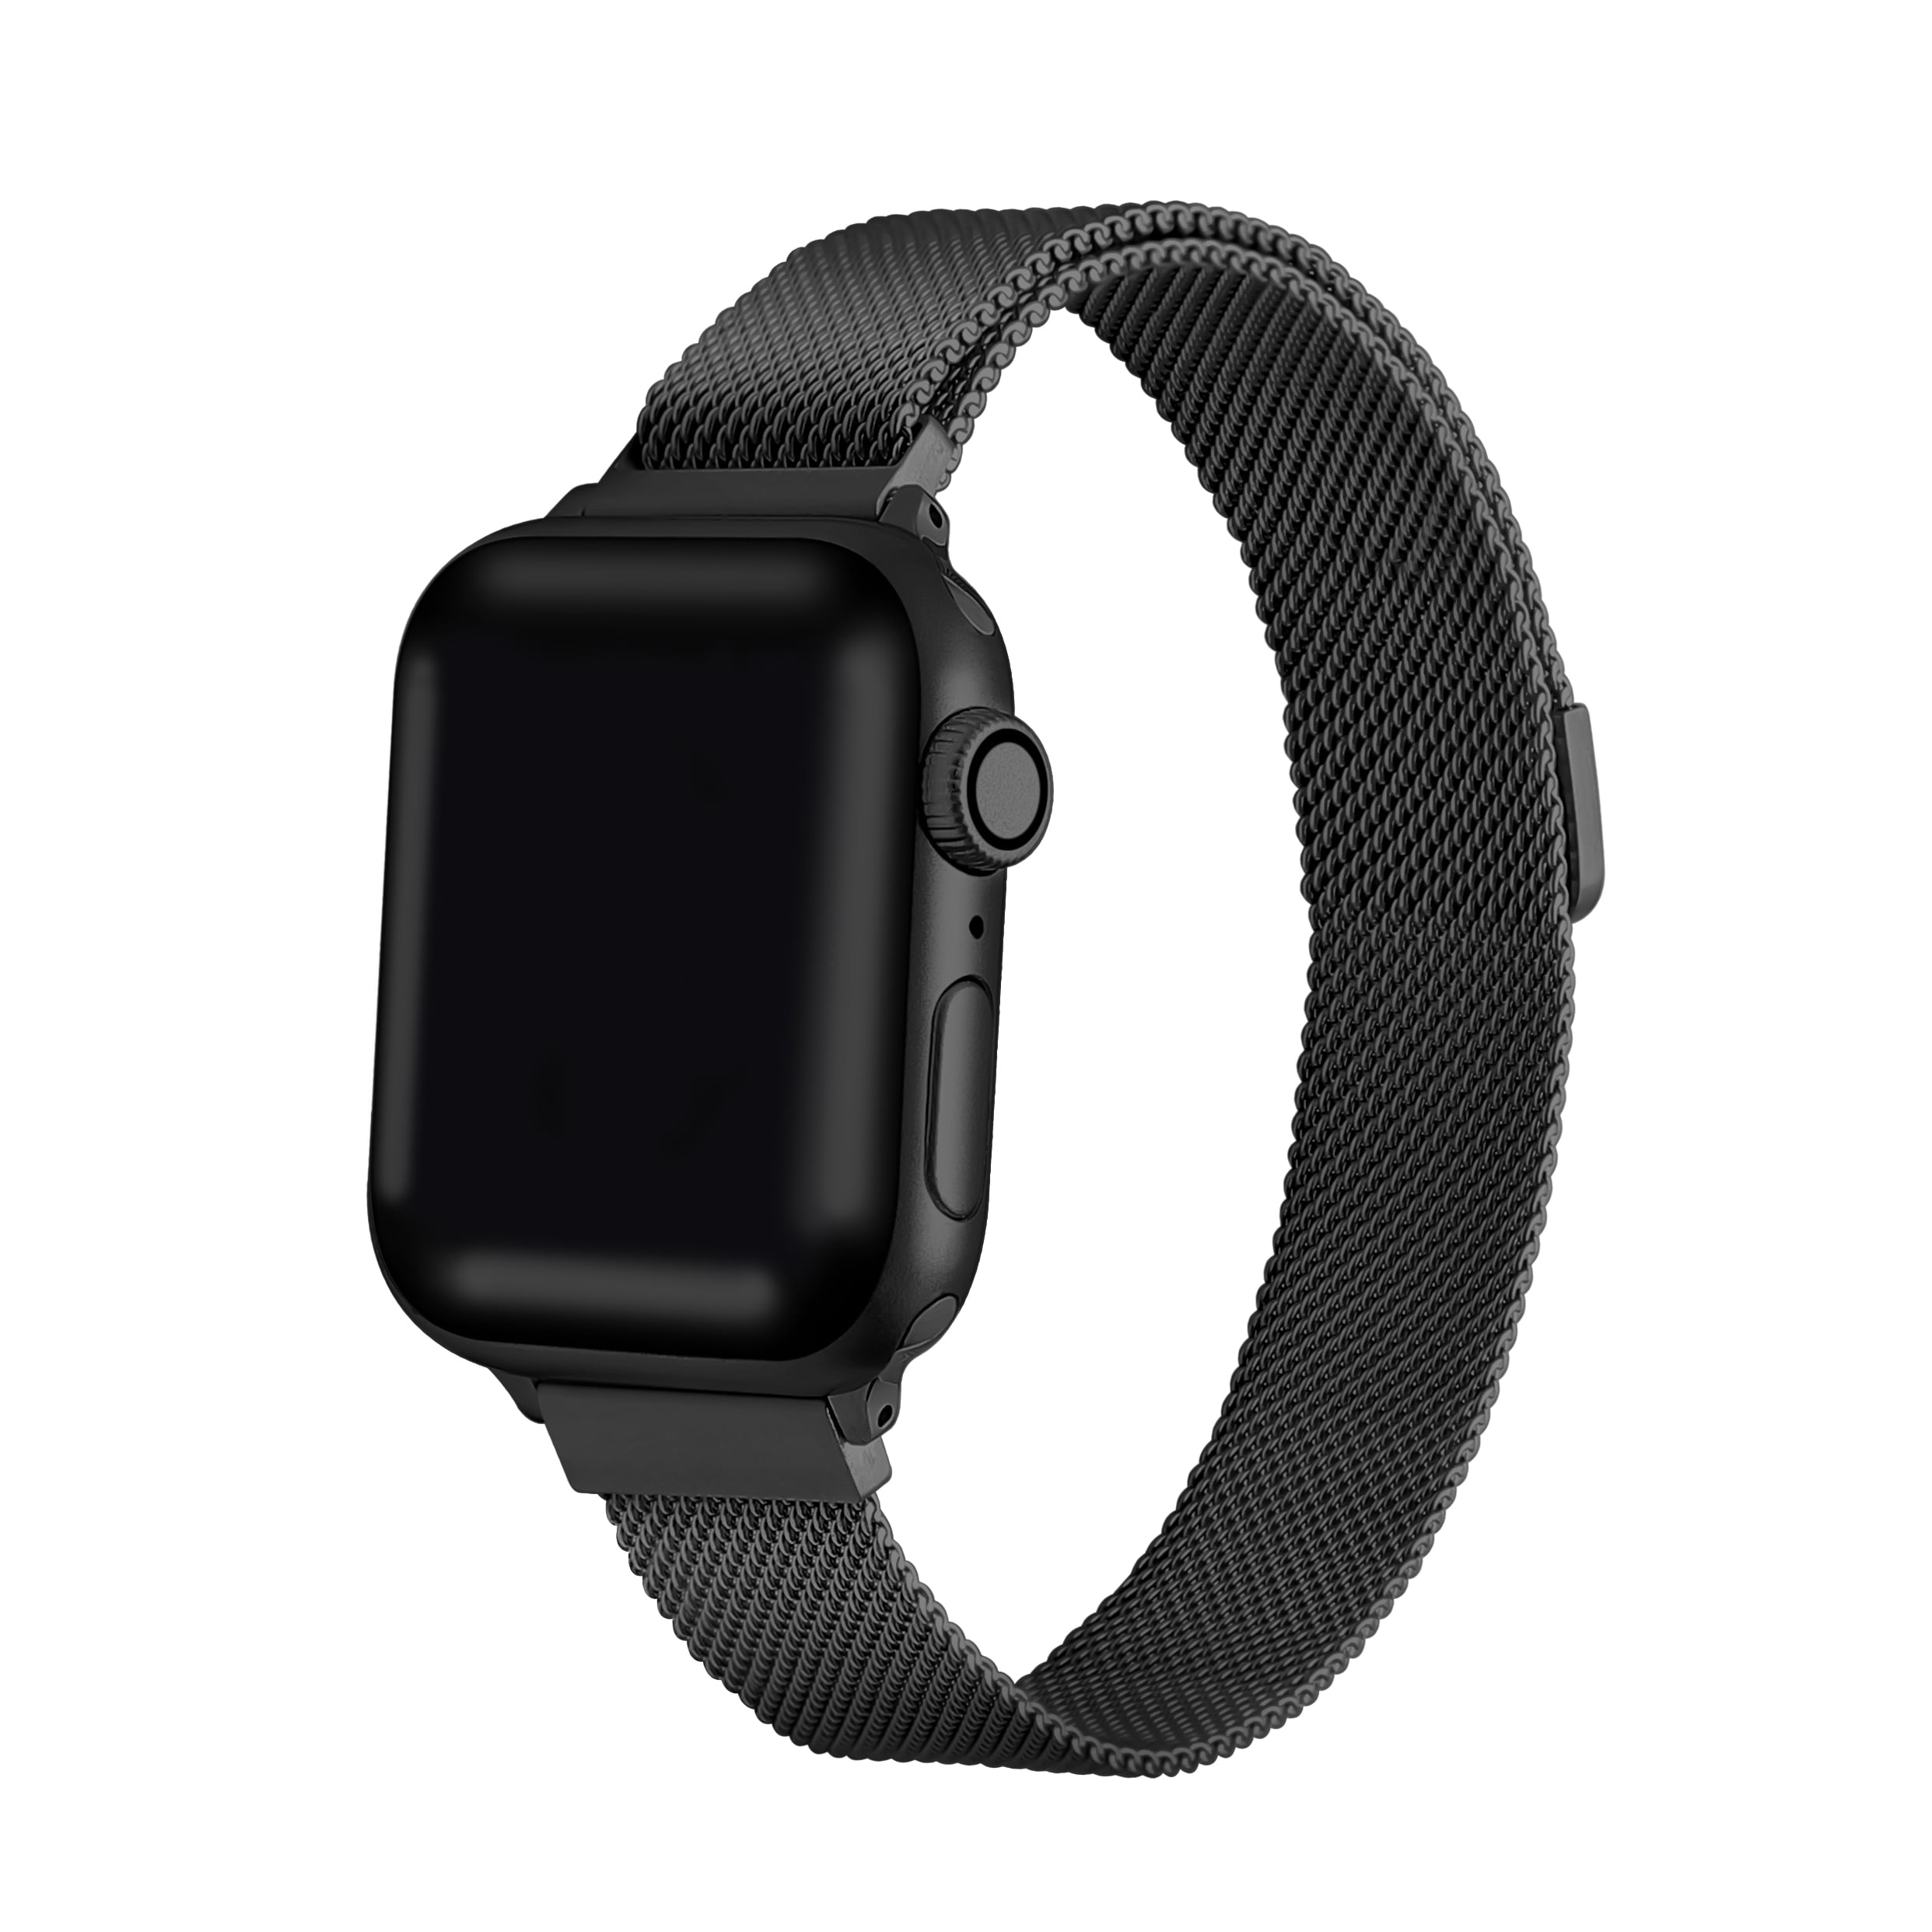 Posh Tech Skinny Infinity Black Stainless Steel Metal Loop Replacement Band  for Apple Watch Series 1,2,3,4,5,6,7,8 & SE - Size 38mm/40mm/41mm